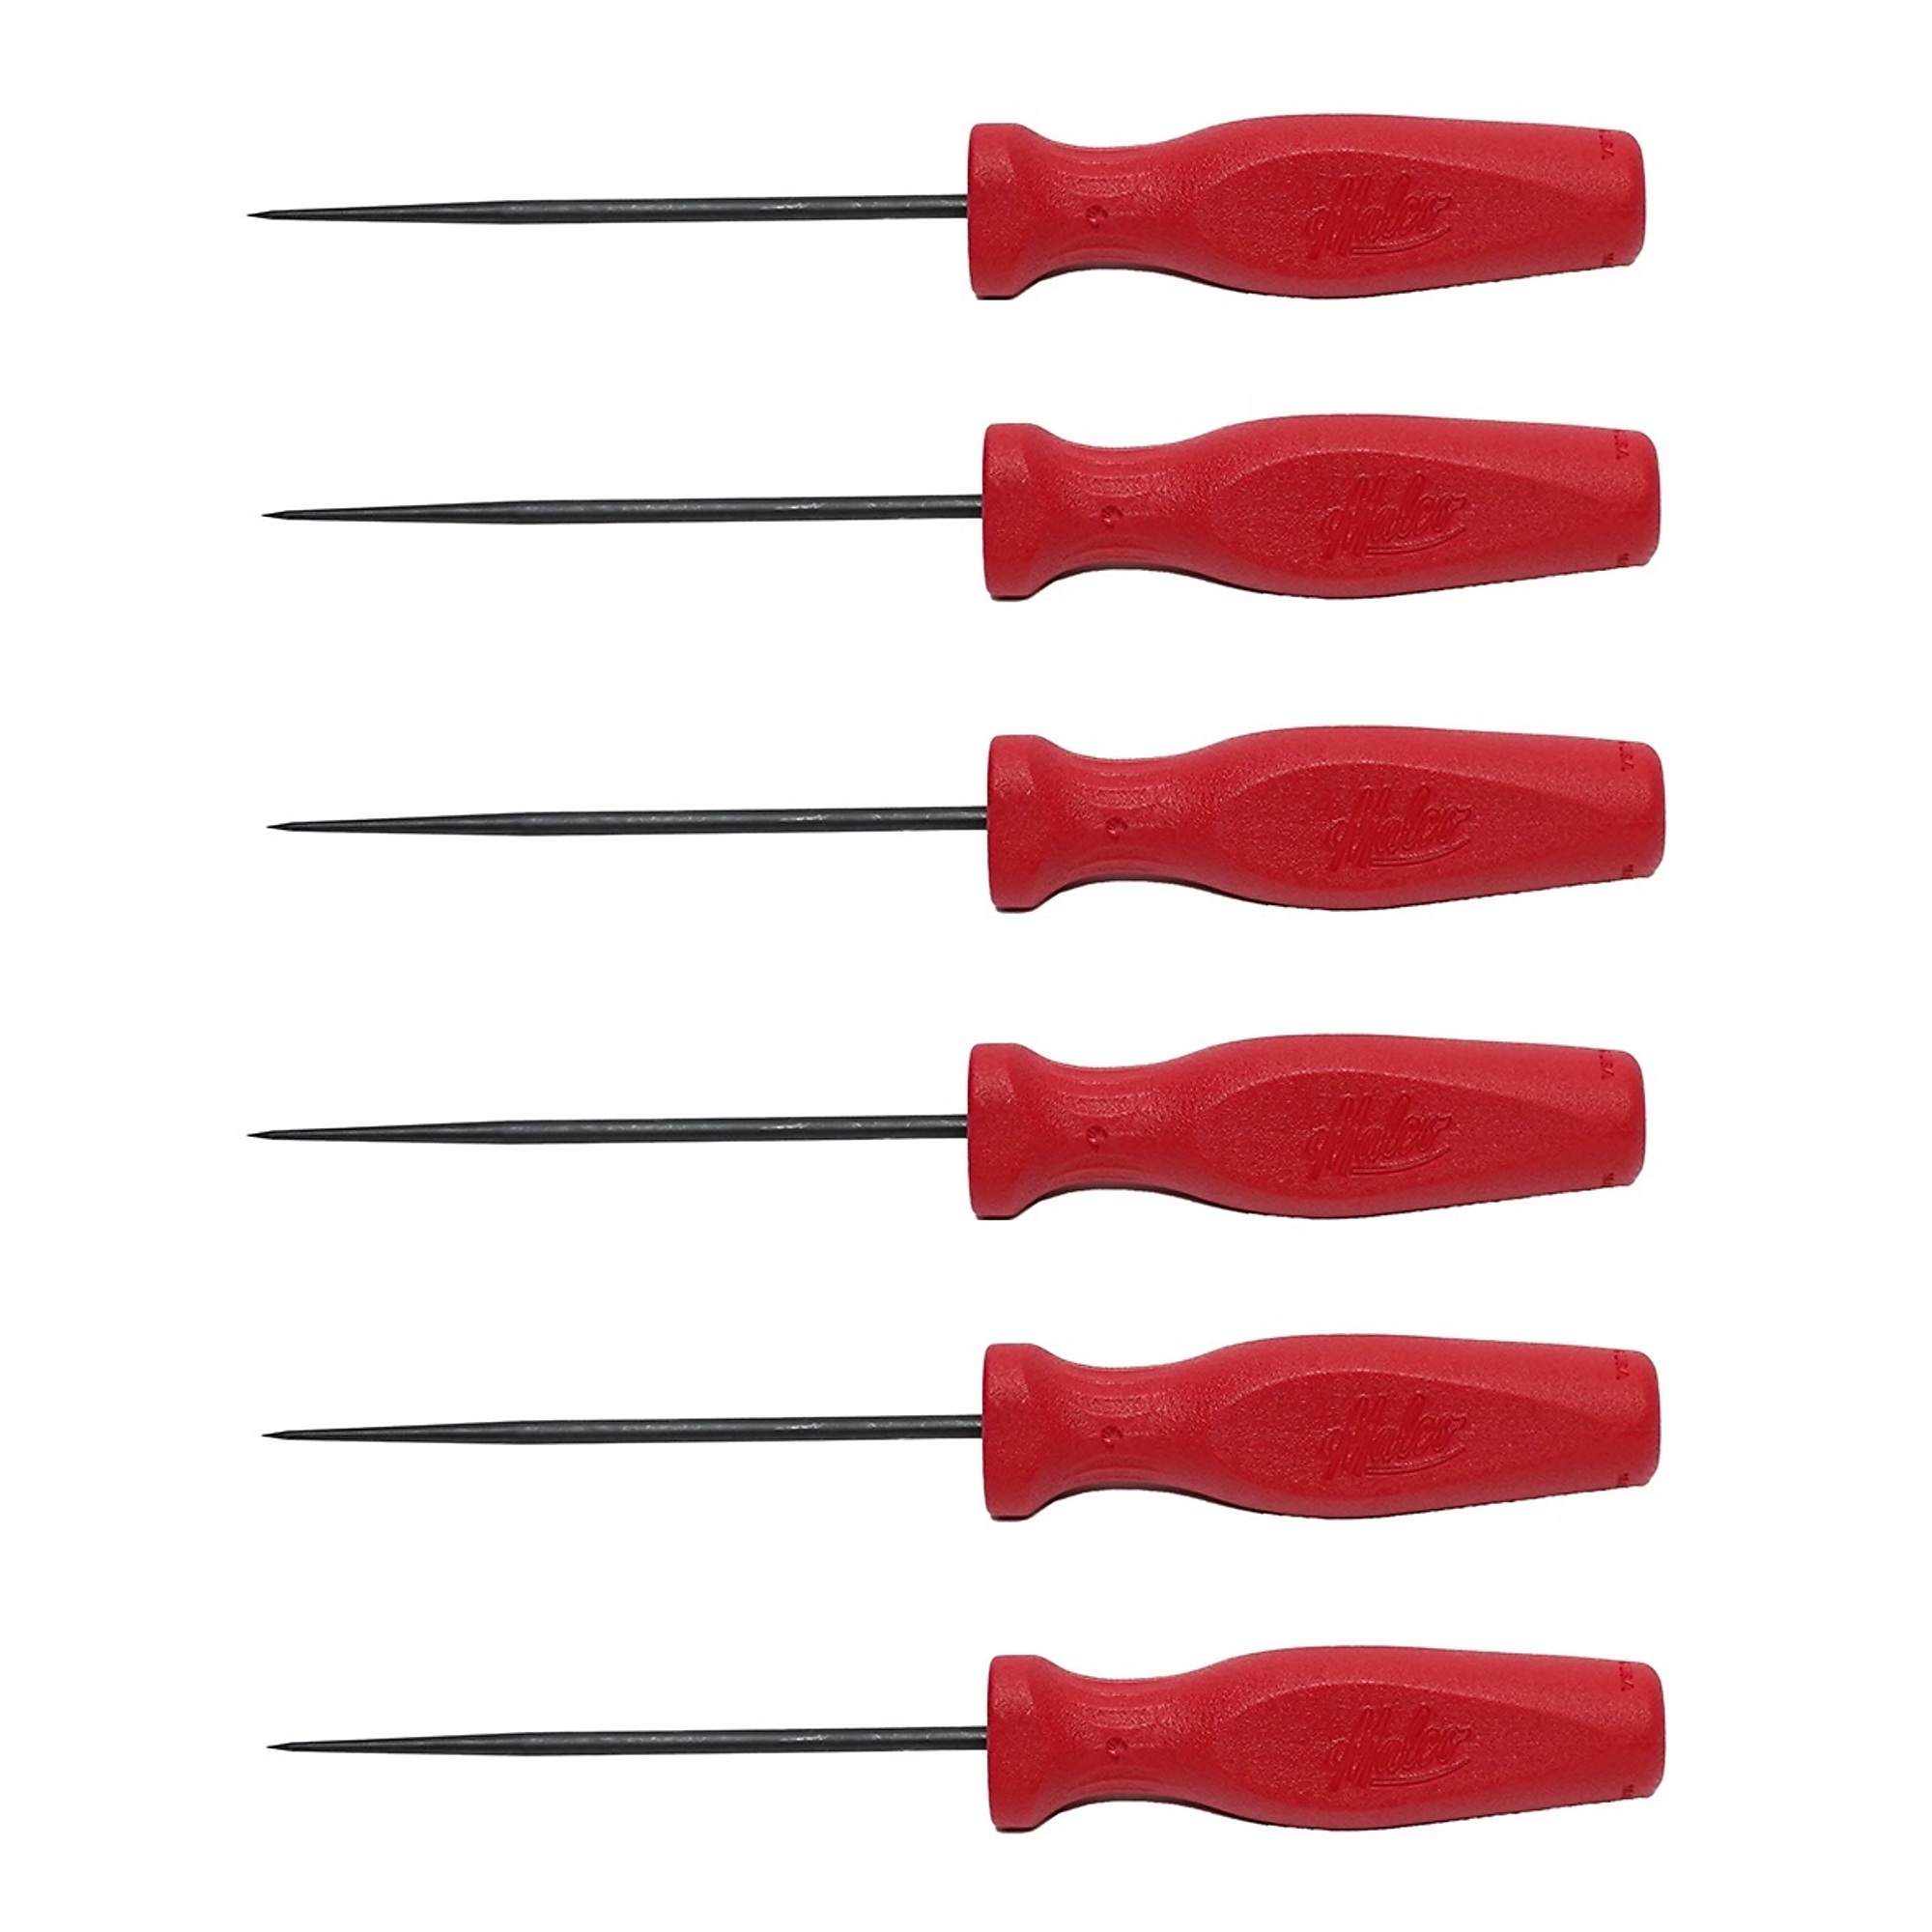 Malco, 1/8in. Scratch Awl with Regular Grip, 6/Box, Product Type Punch,  Pieces (qty.) 6, Model# A0-6